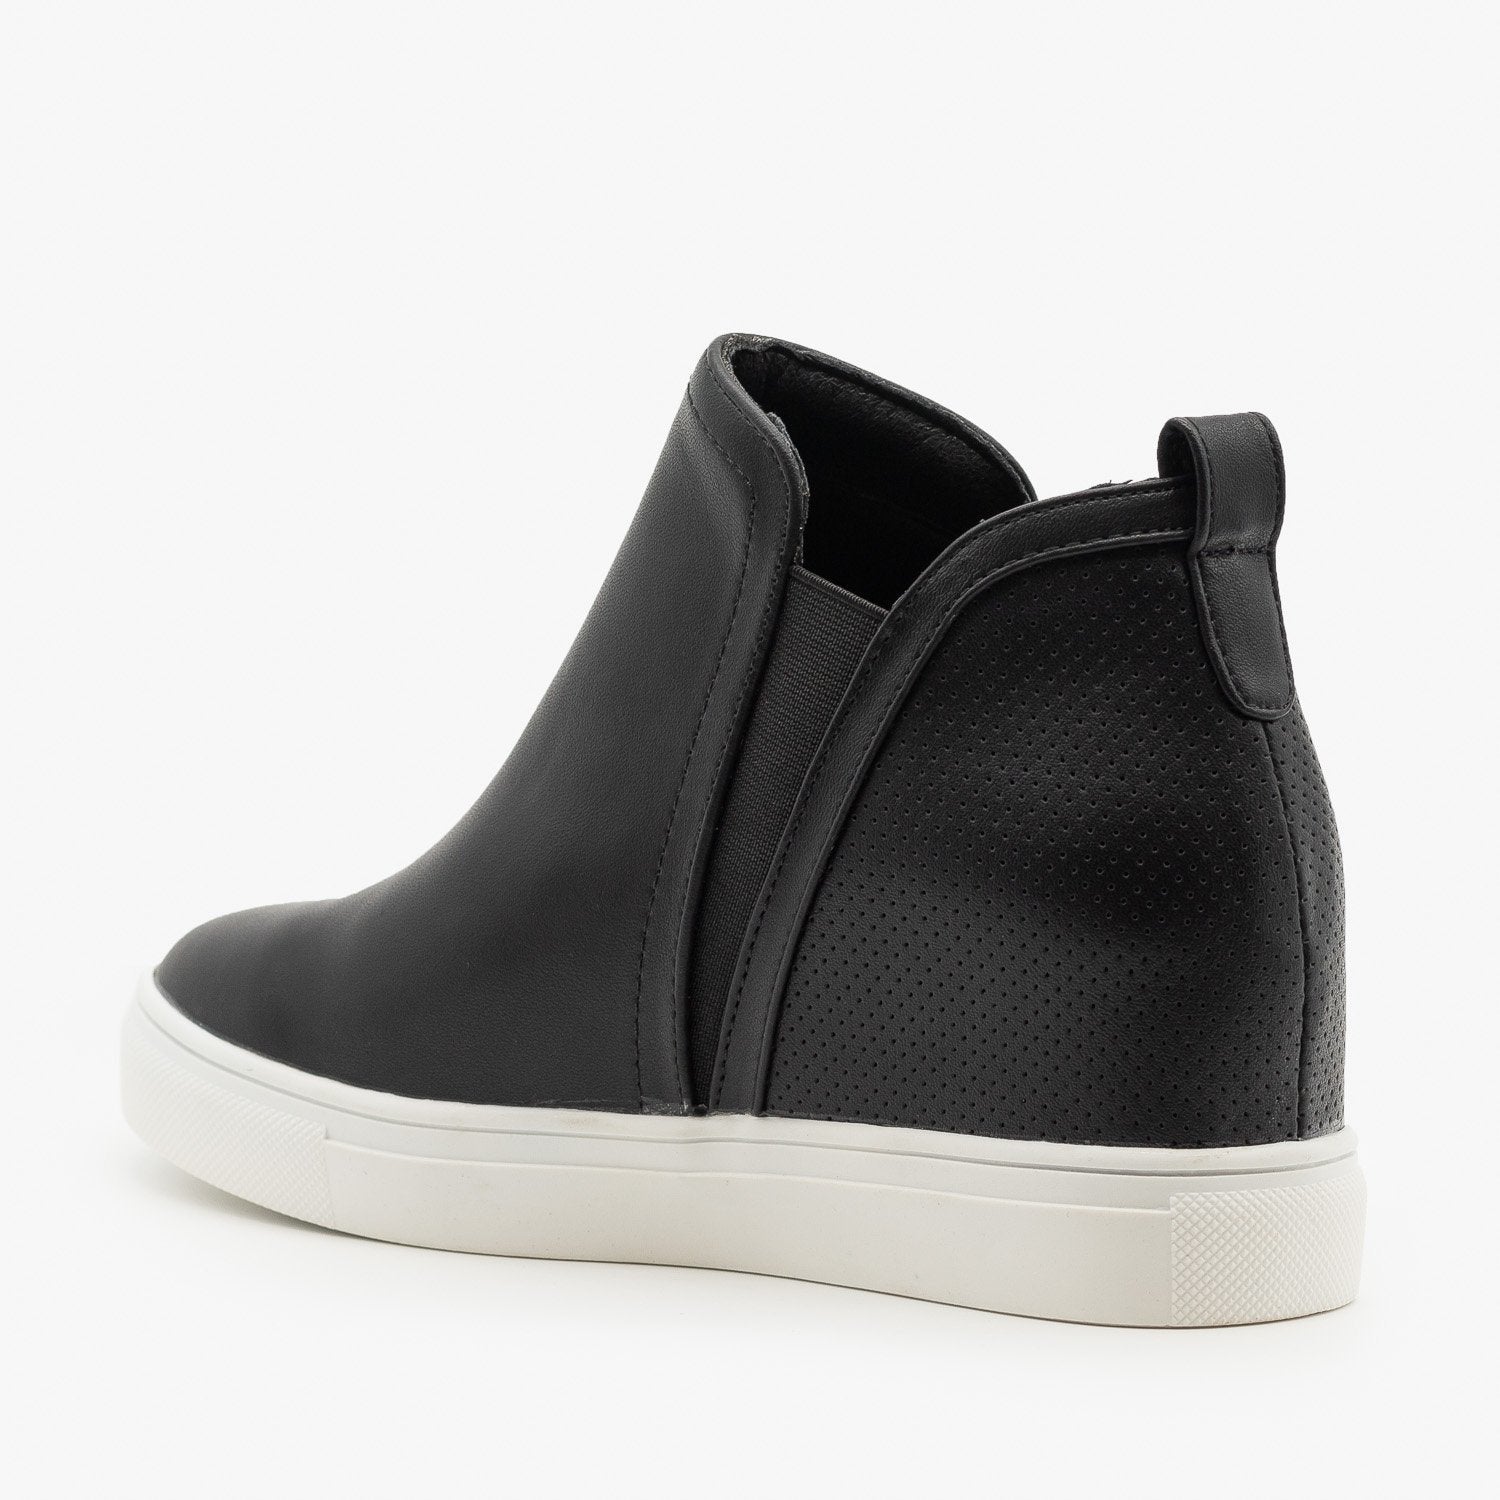 Pinhole Heel Ankle Sneakers - Forever 